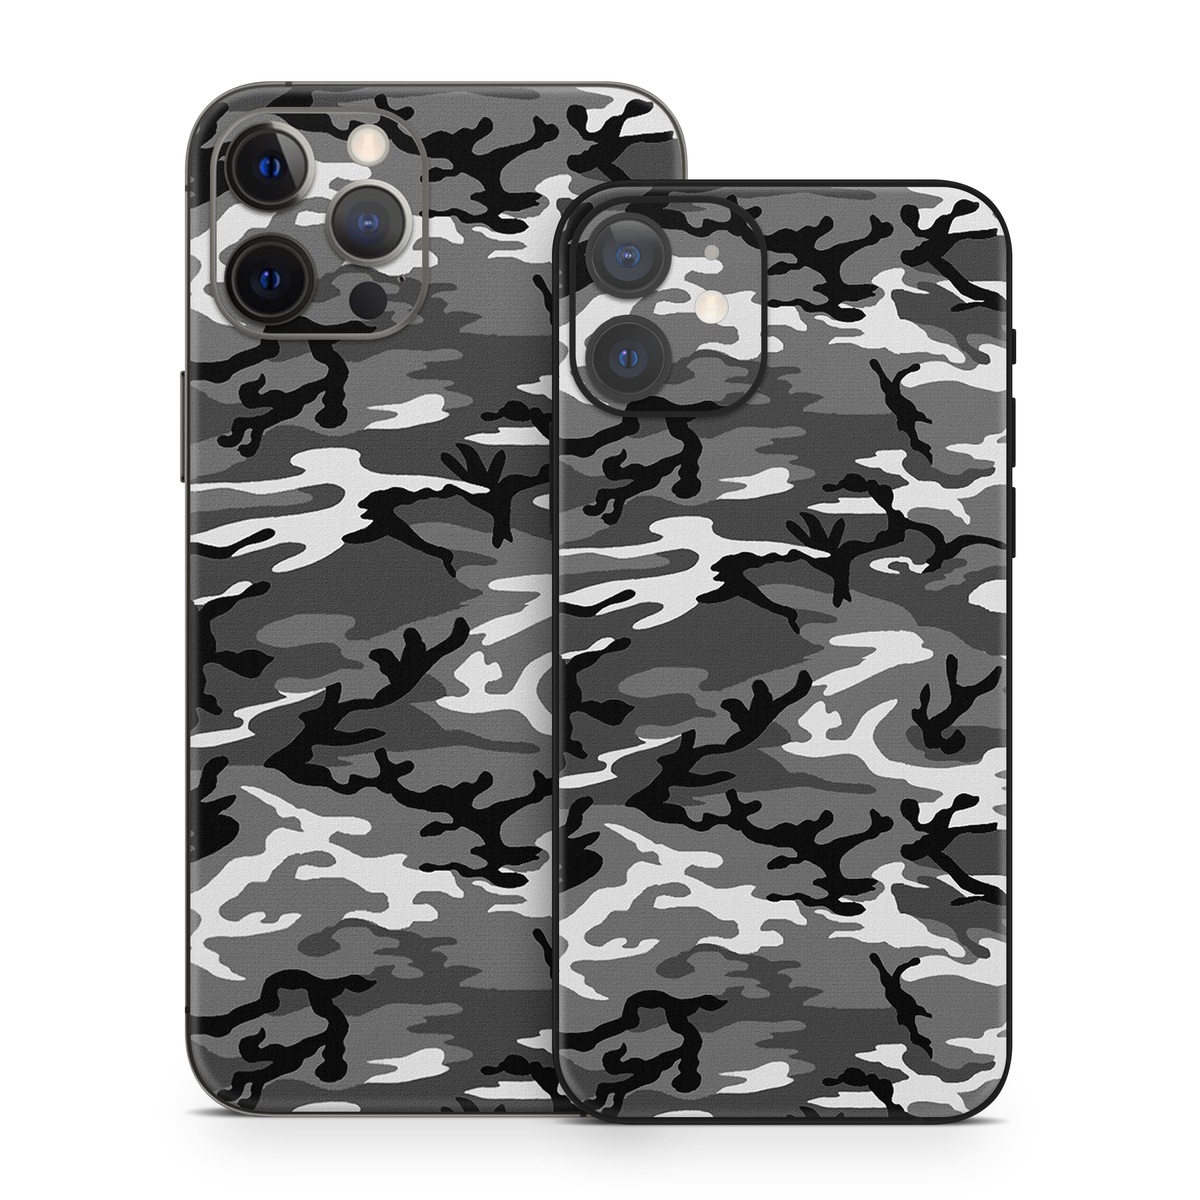 iPhone 12 Skin design of Military camouflage, Pattern, Clothing, Camouflage, Uniform, Design, Textile with black, gray colors